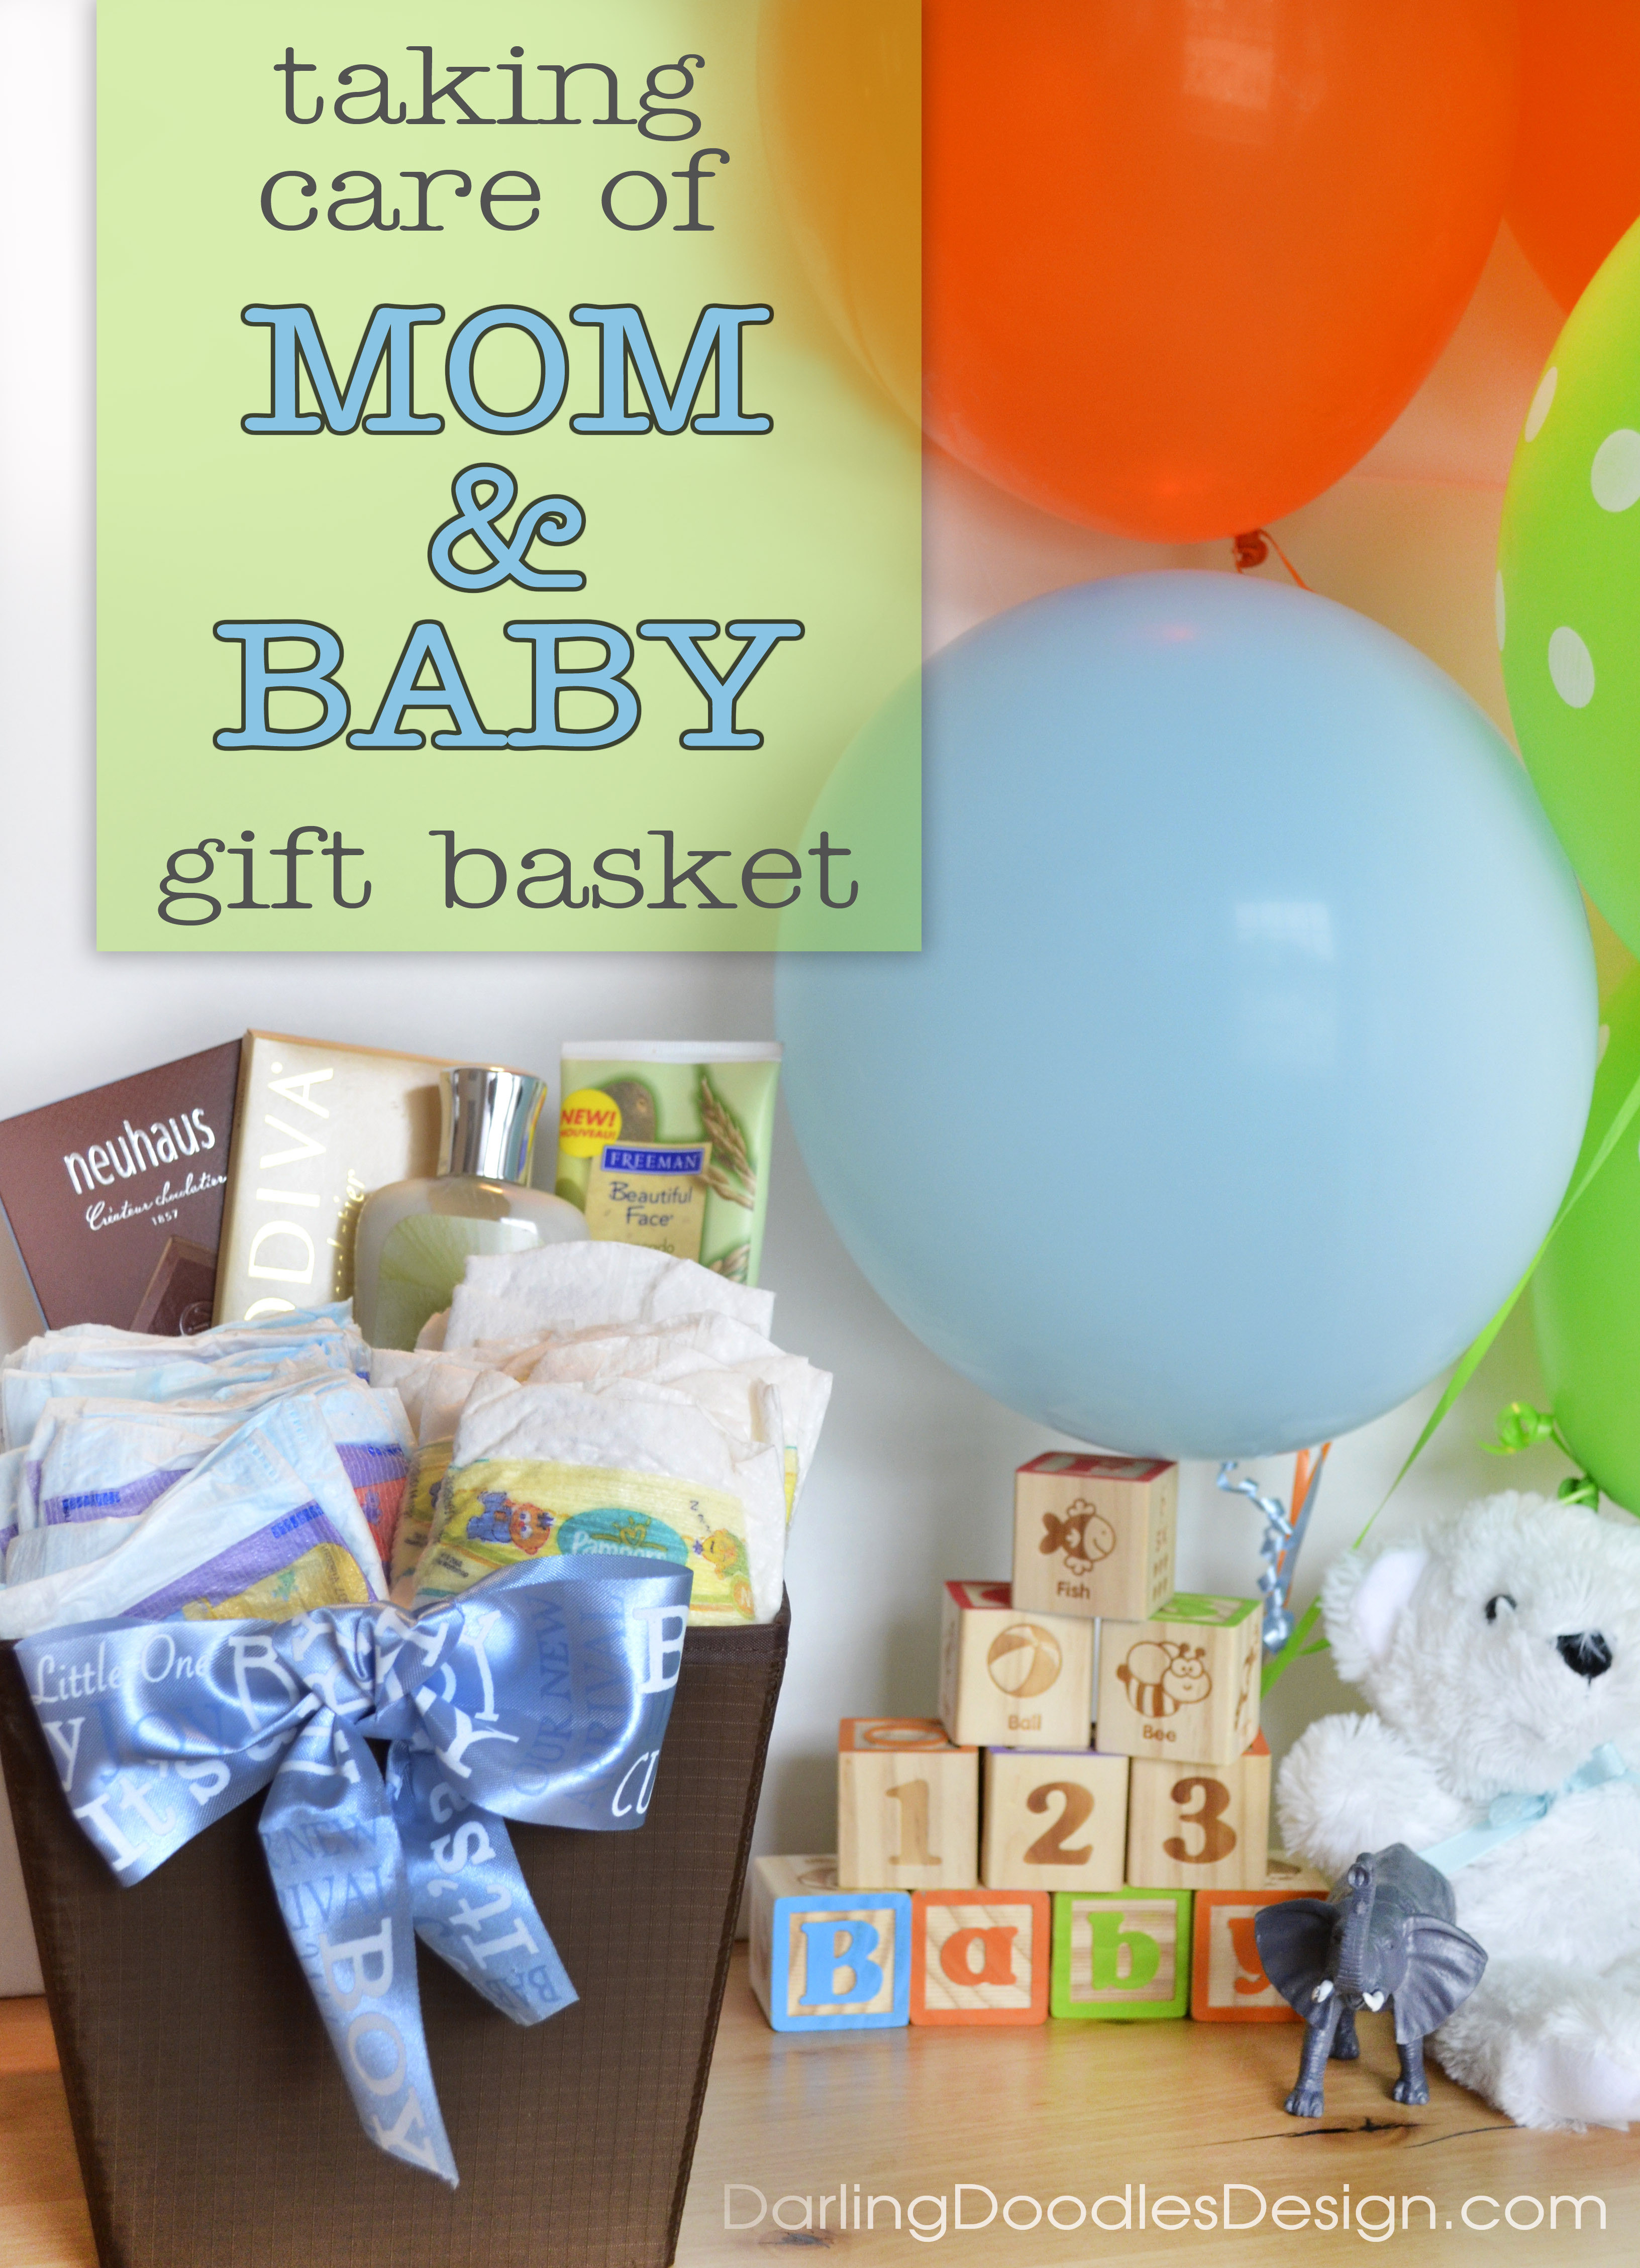 Baby Shower Gift Ideas For Mom
 A Baby Shower Gift for Mom & Baby Darling Doodles